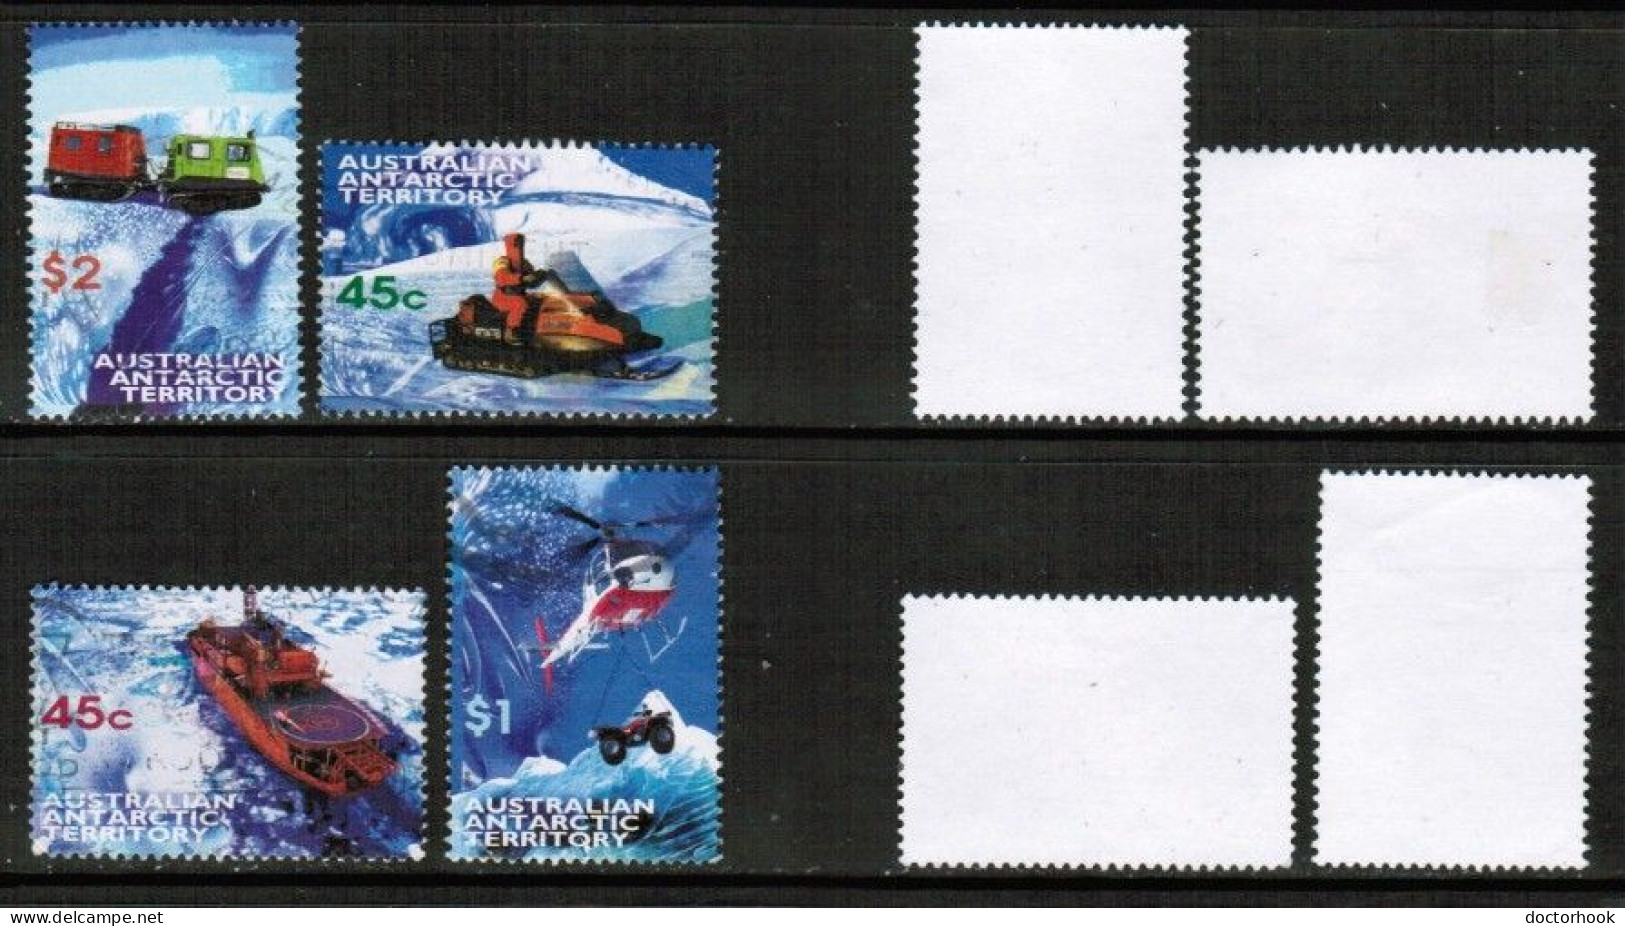 AUSTRALIAN ANTARCTIC TERRITORY   Scott # L 107-10 USED (CONDITION AS PER SCAN) (Stamp Scan # 930-6) - Gebraucht